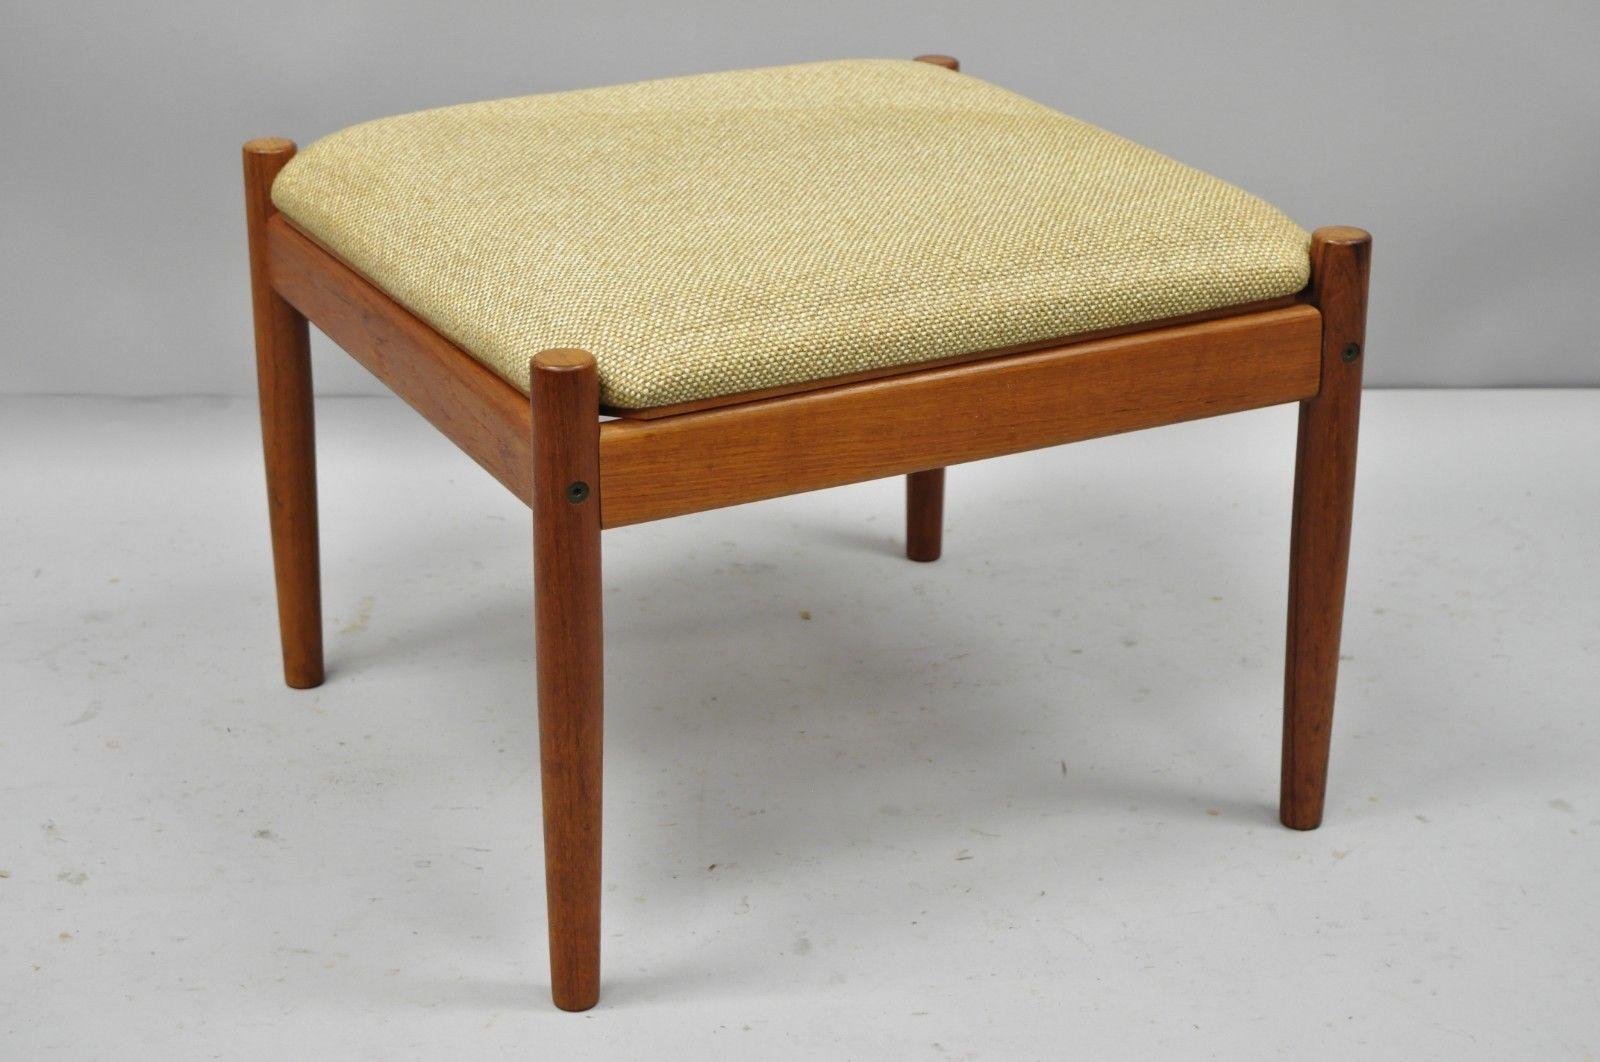 Flip-top midcentury Danish modern convertible teak side table, stool or ottoman. Item features convertible flip top which changes from a side table to an upholstered stool, stamped 